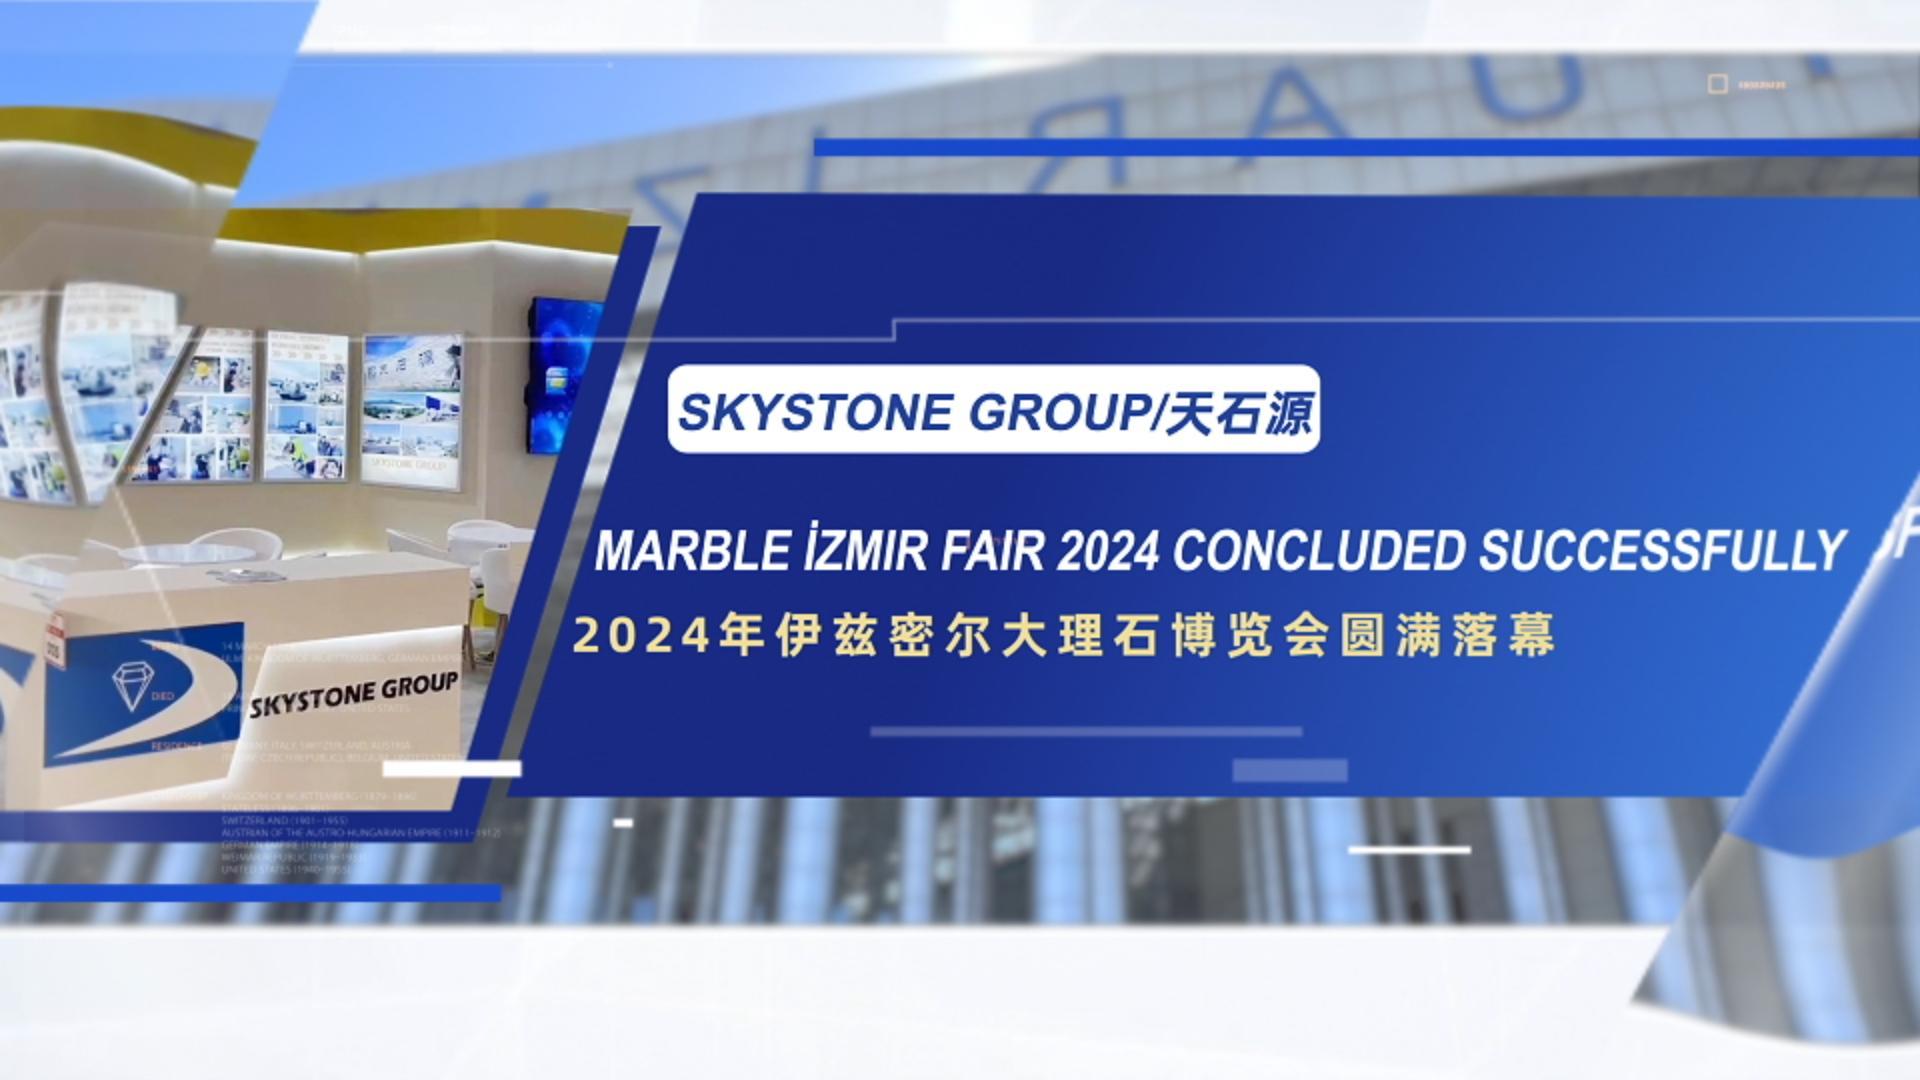 The 29th Marble Izmir Fair in 2024 has successfully concluded